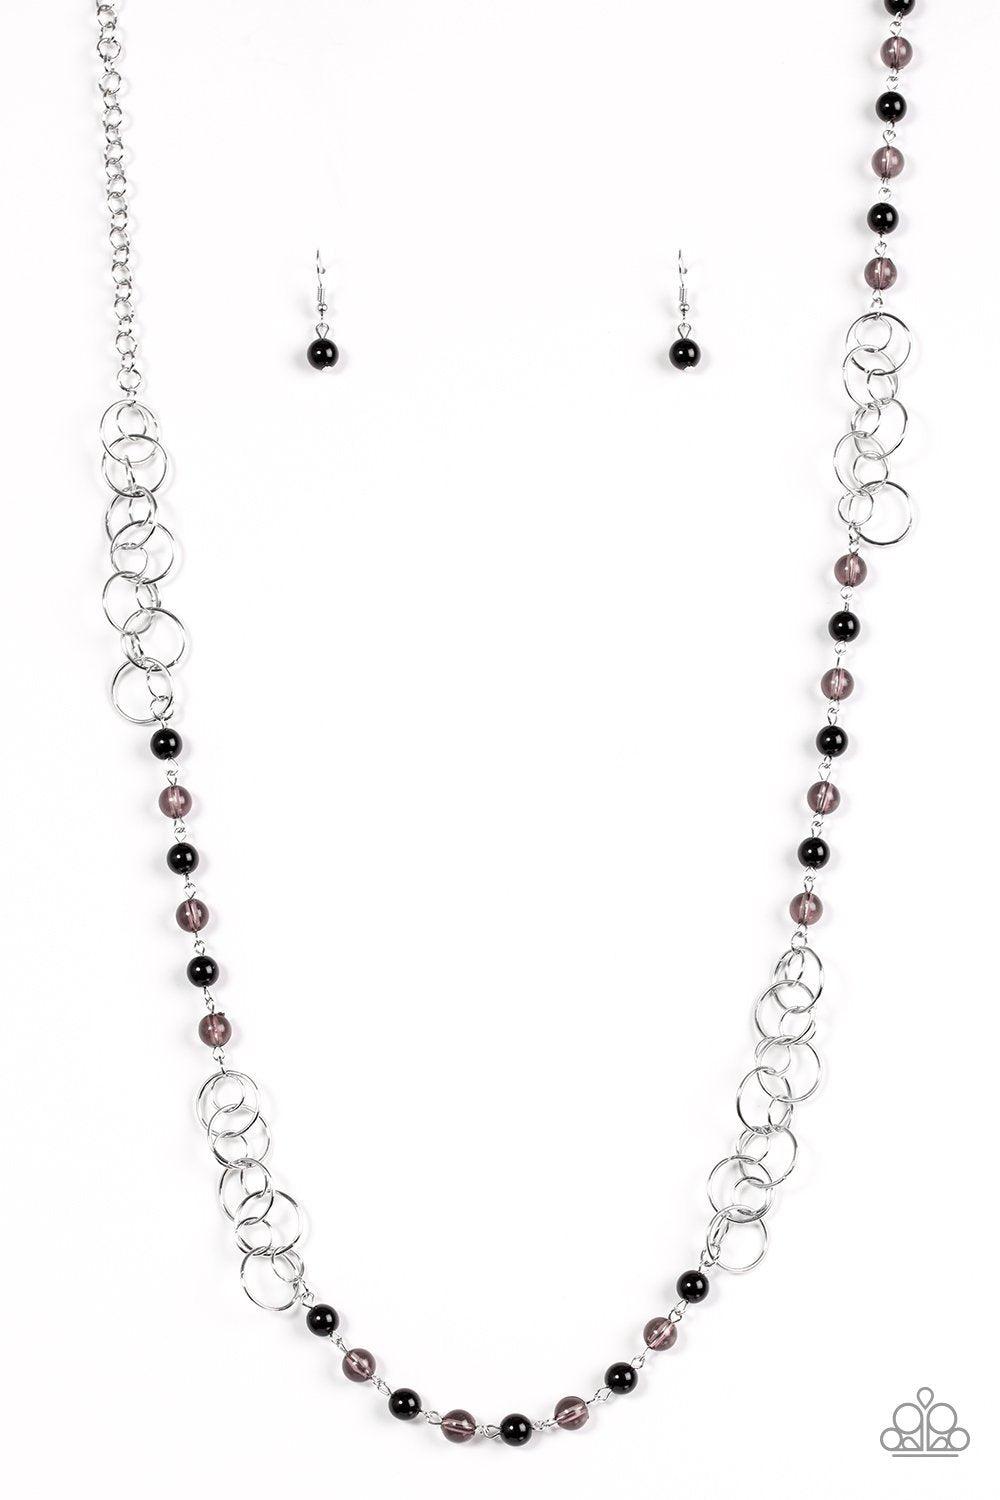 Dreamy Discovery Black and Silver Necklace - Paparazzi Accessories-CarasShop.com - $5 Jewelry by Cara Jewels